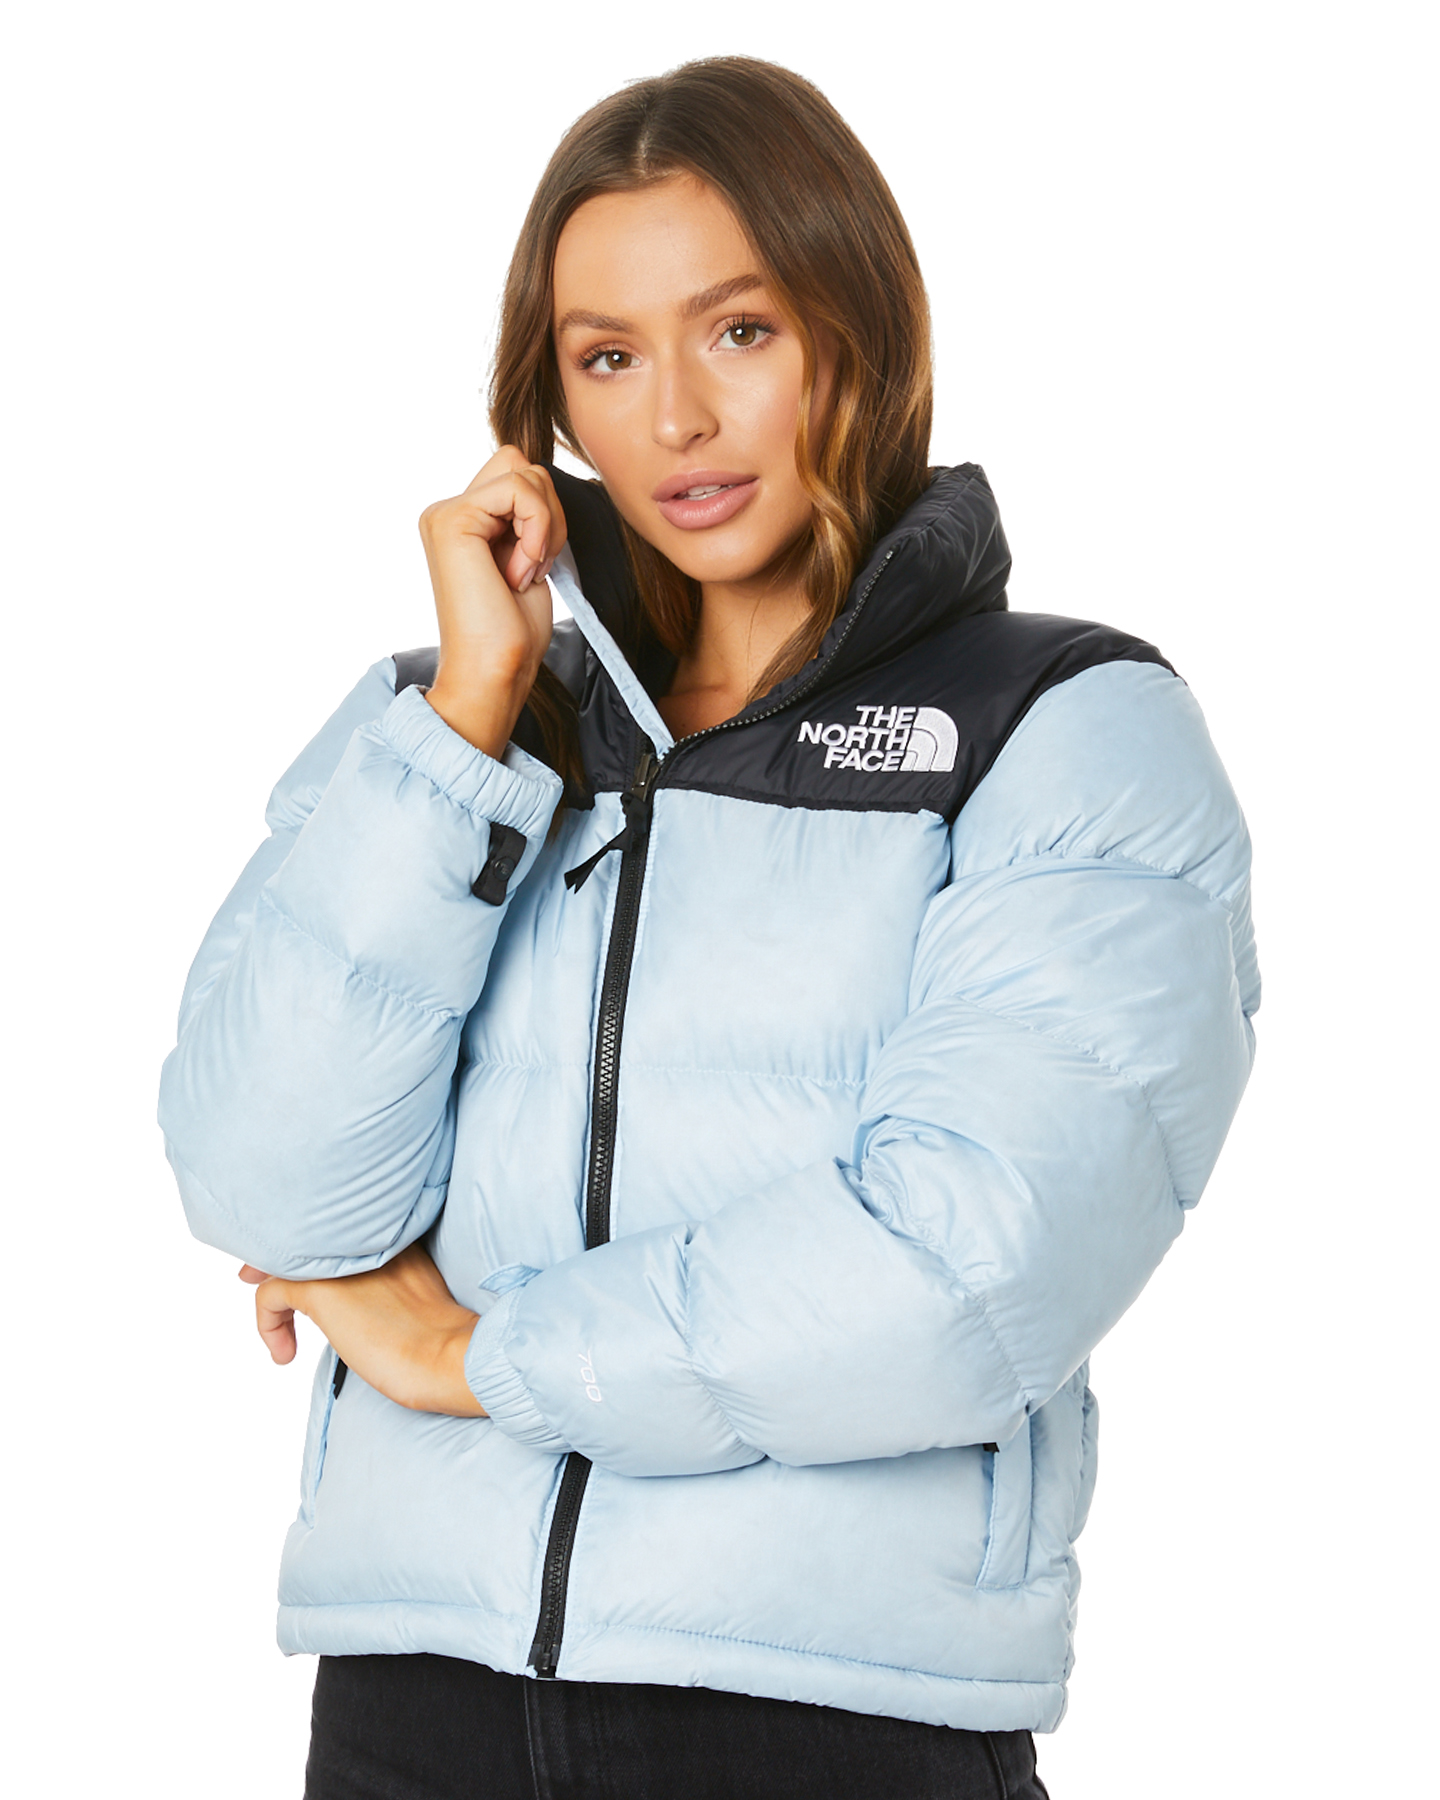 The North Face Women S 1996 Retro Nuptse Jacket Online Shopping Has Never Been As Easy